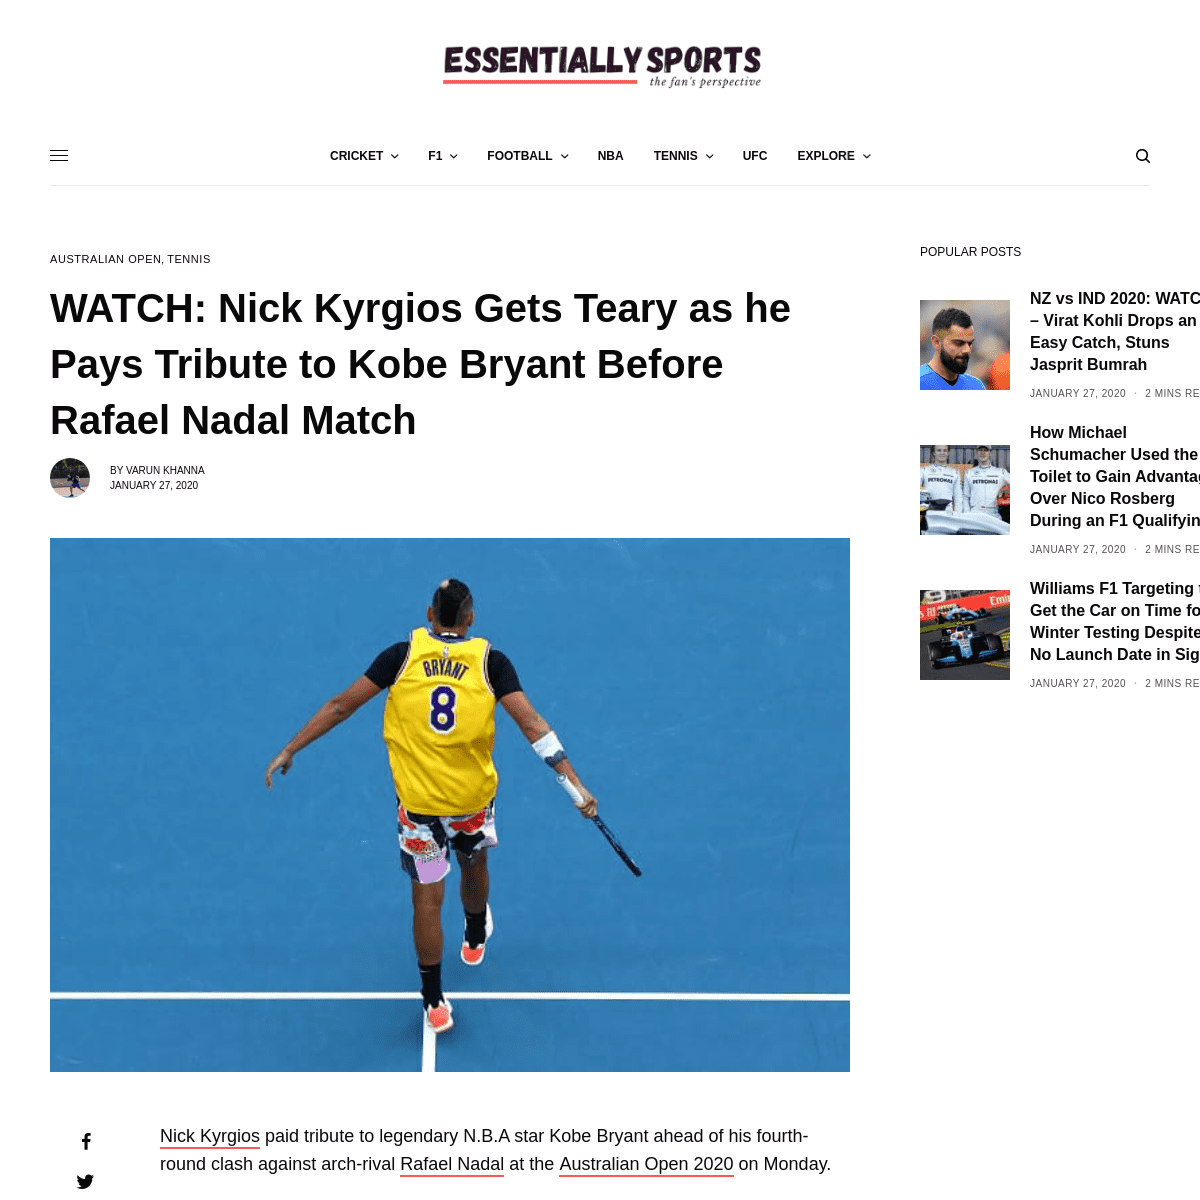 A complete backup of www.essentiallysports.com/watch-nick-kyrgios-gets-teary-as-he-pays-tribute-to-kobe-bryant-before-rafael-nad